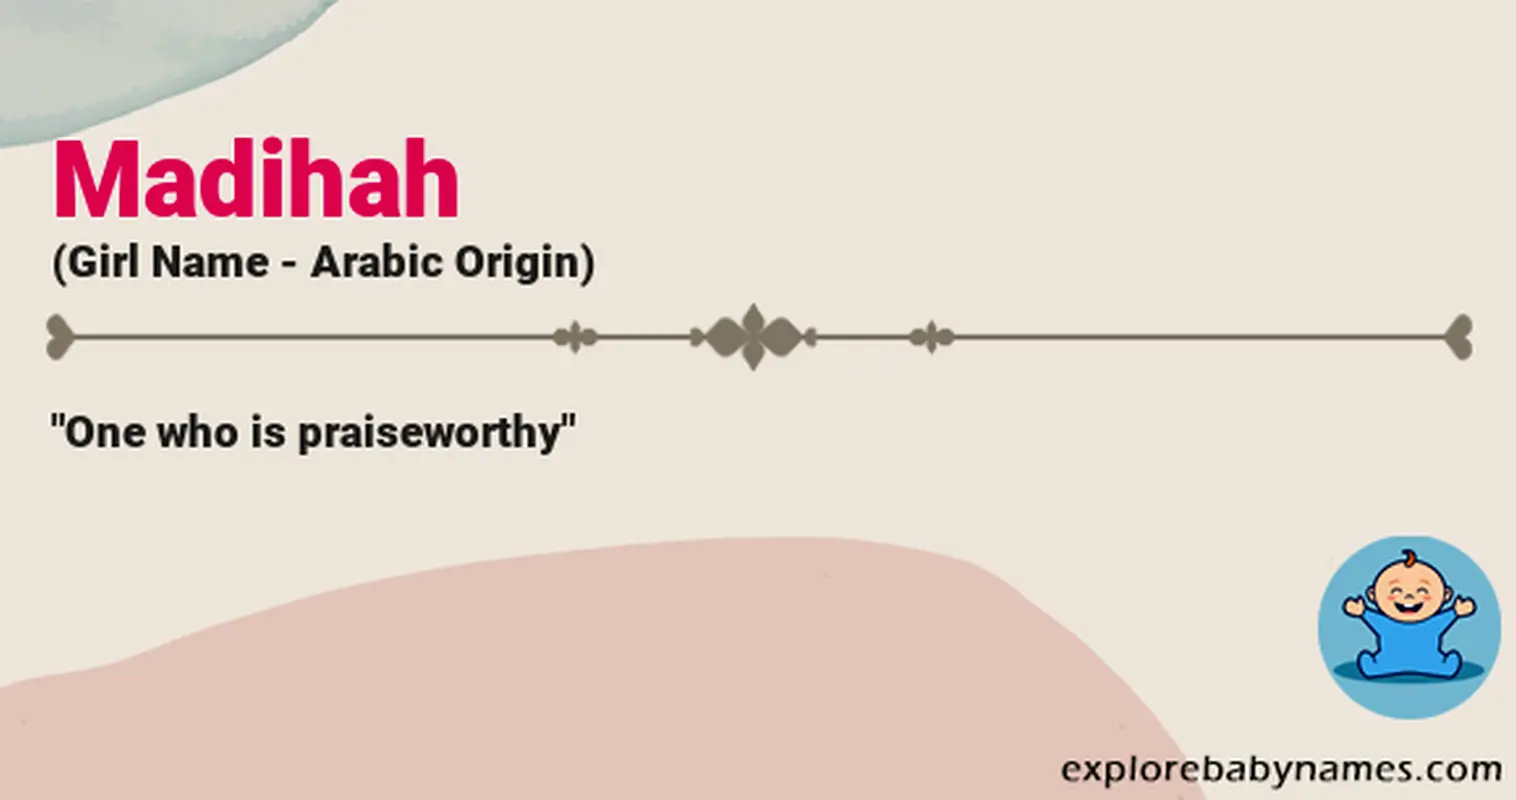 Meaning of Madihah